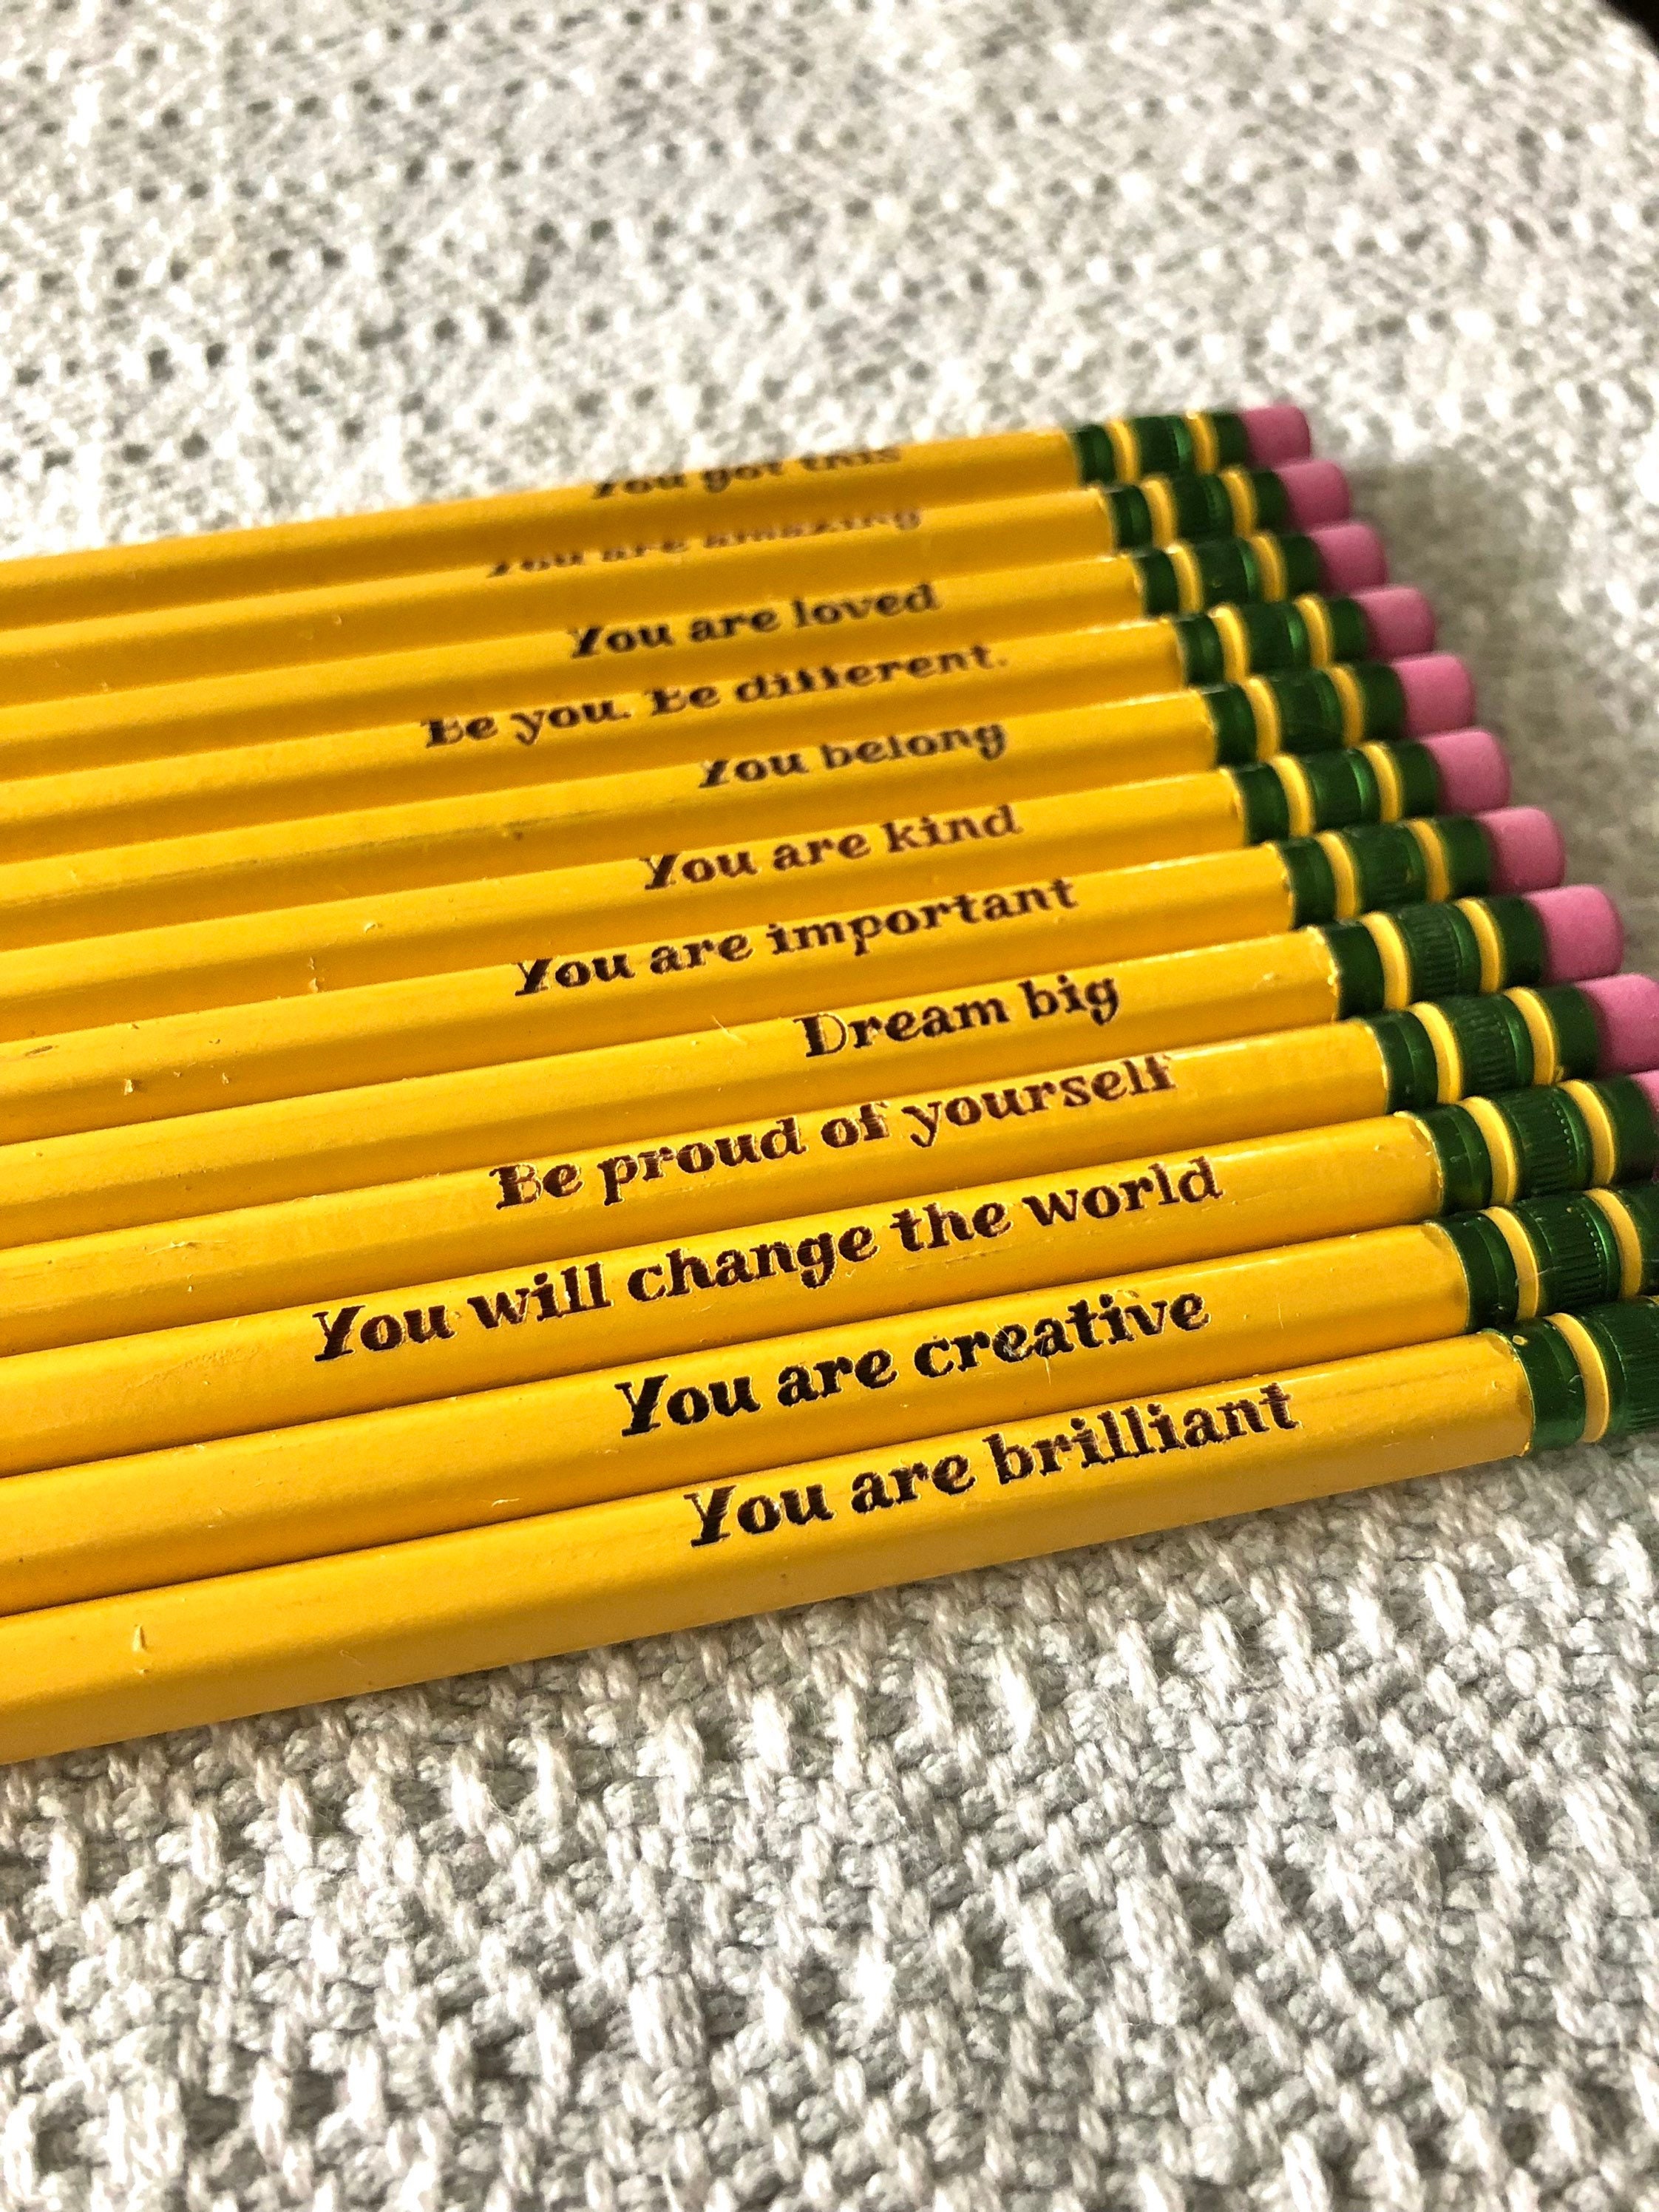  DASHENRAN Affirmation Pencil Set, Motivational Pencils,  Personalized Compliment Wood Pencils, Pencil Set for Sketching and Drawing,  for Students and Teachers, (Color+Primary) : Office Products